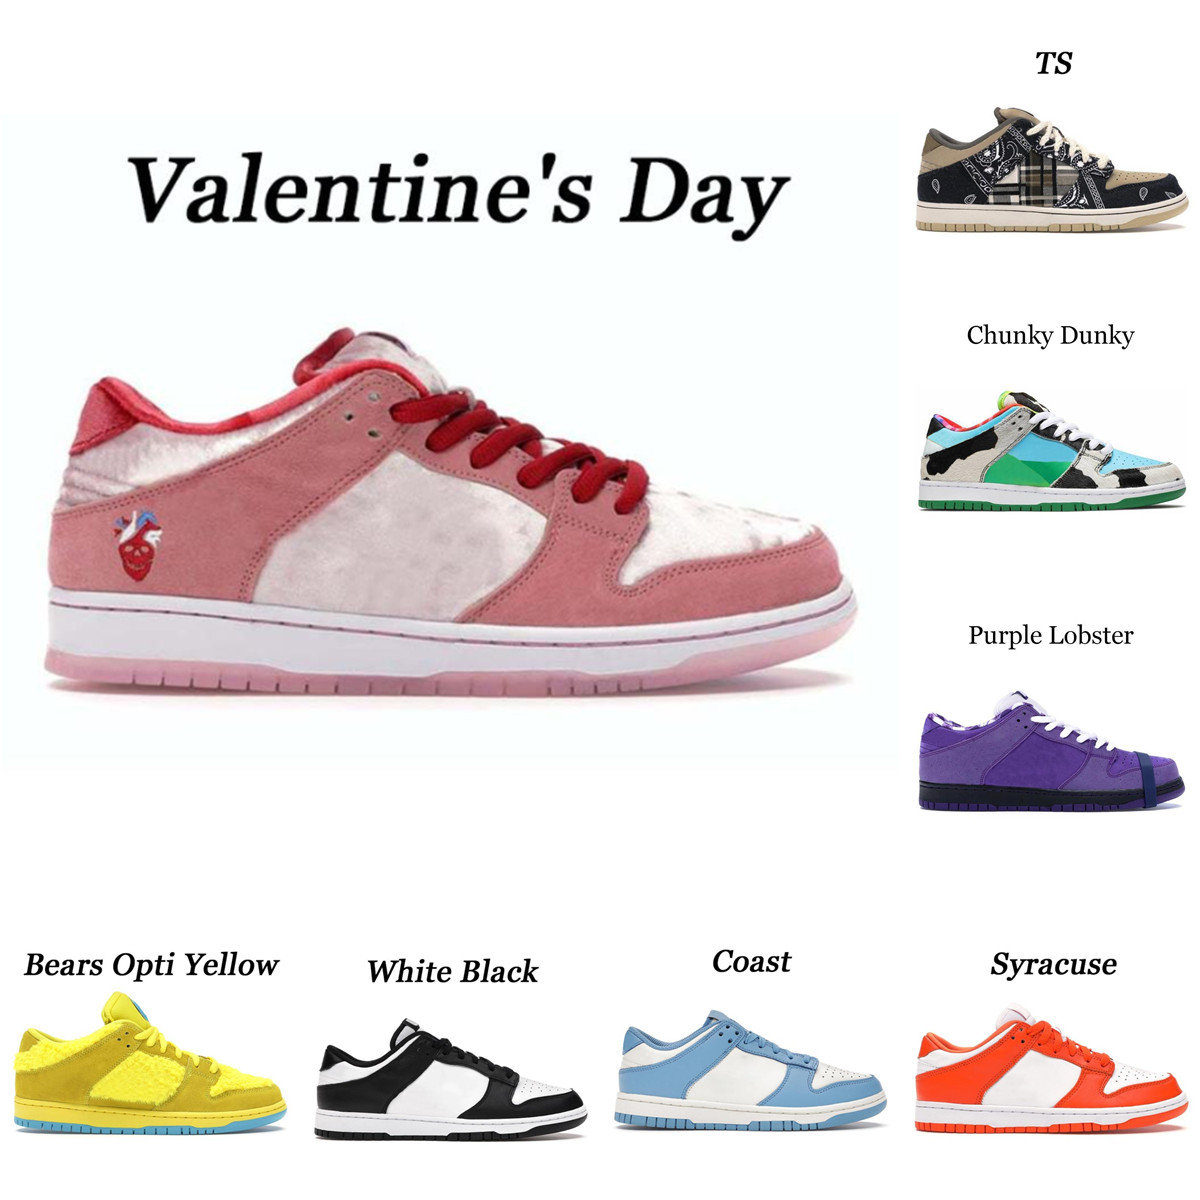 

Top SB Low Dunk PRM Medium Curry Dunks Men Women Shoes Platform Designer Skateboard Sneakers UNC Night of Mischief Kentucky Trainers Sneaker Chaussures Sports 36-45, Other brand colors